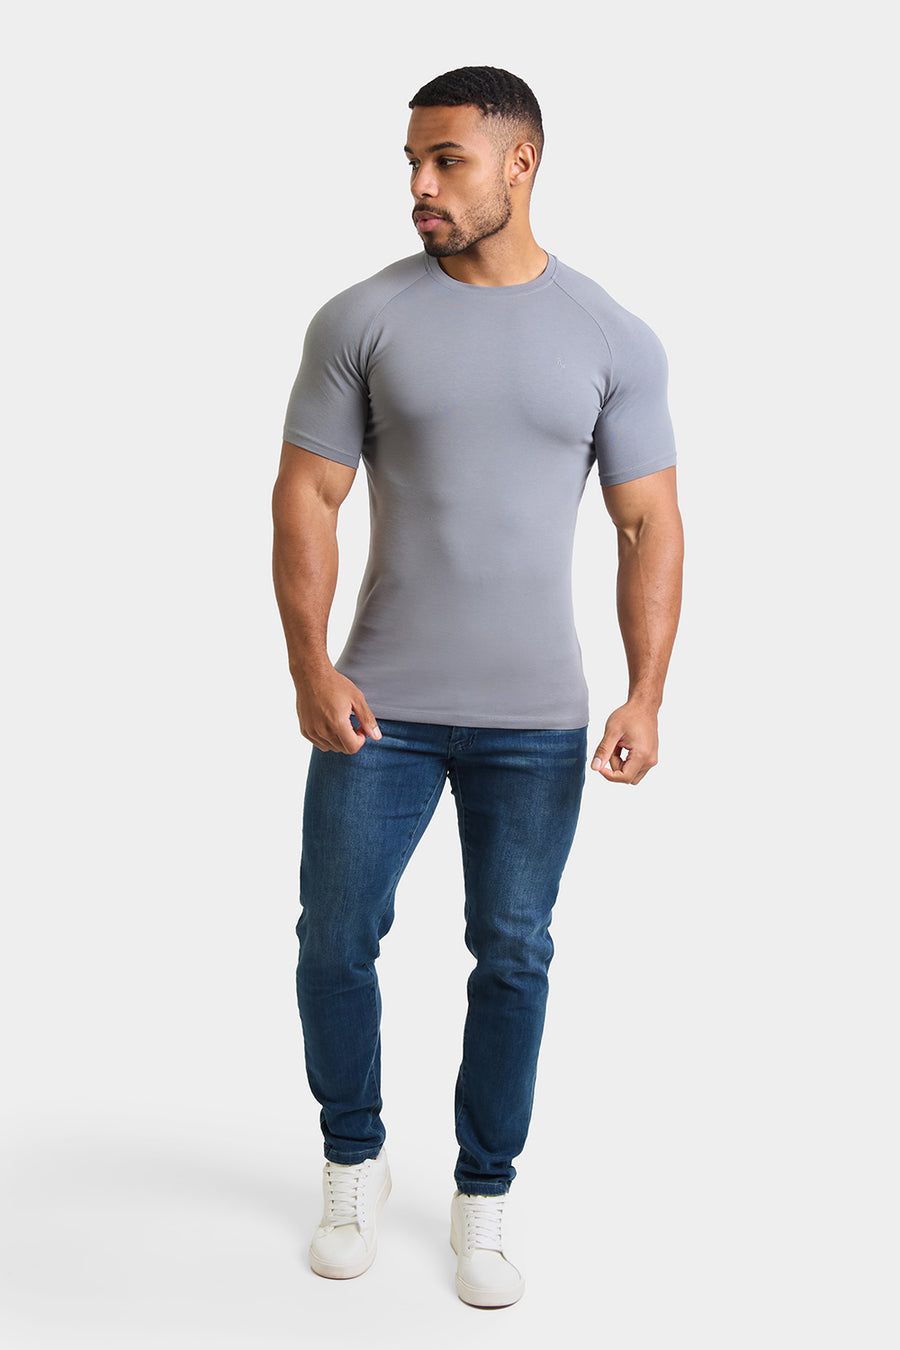 Athletic Fit T-Shirt in Lead Grey - TAILORED ATHLETE - USA